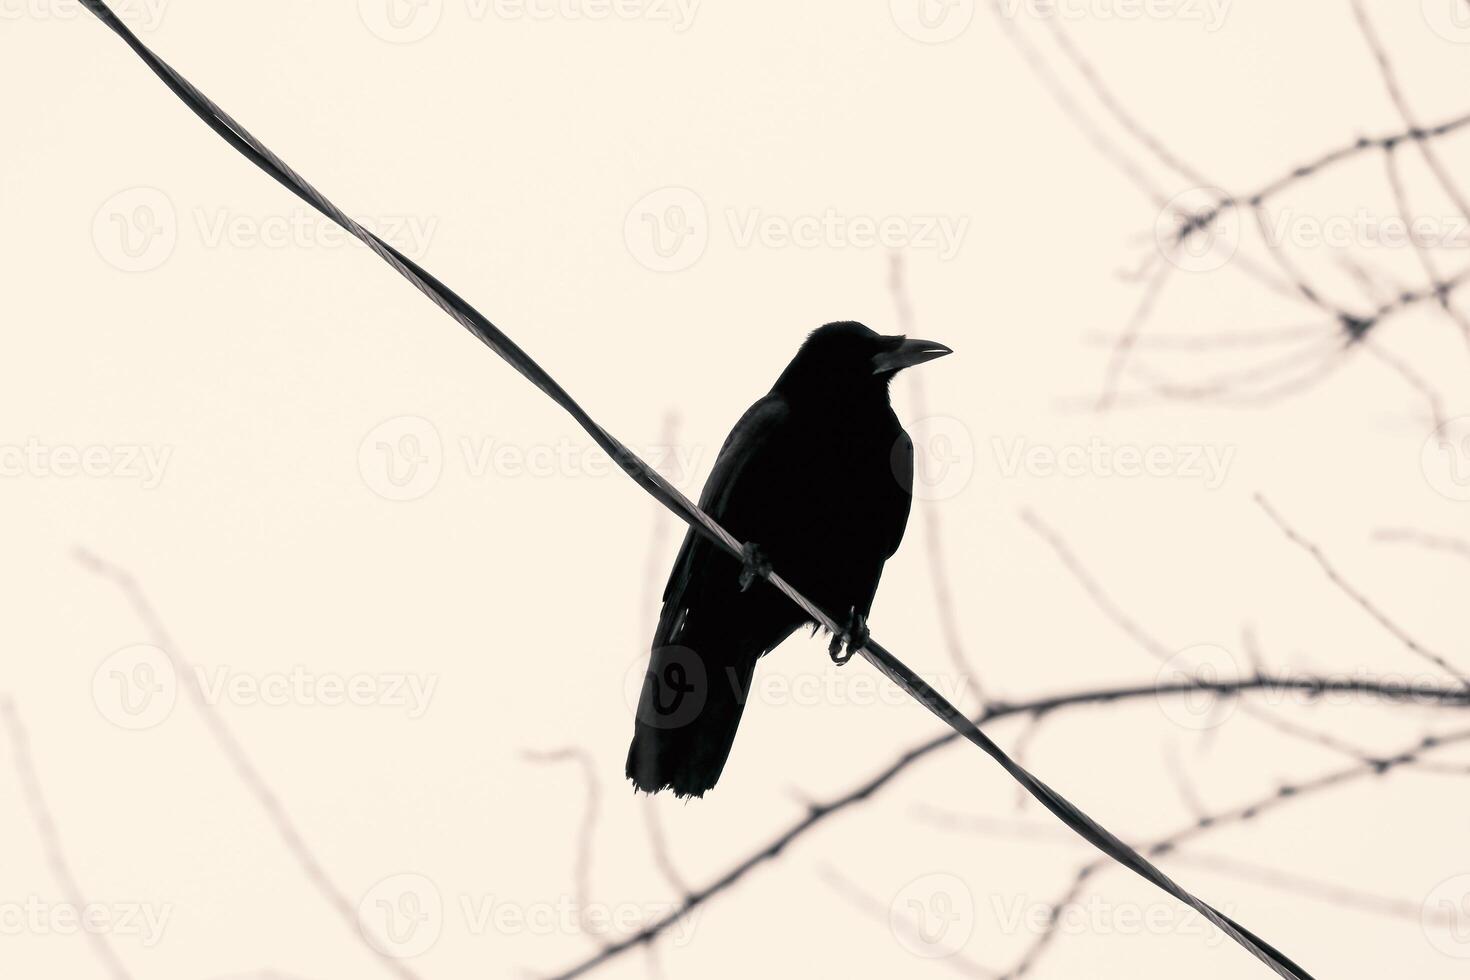 Stark black electricity wires against winter sky, with a majestic crow perched, creating an enchanting urban scene in sepia tones photo